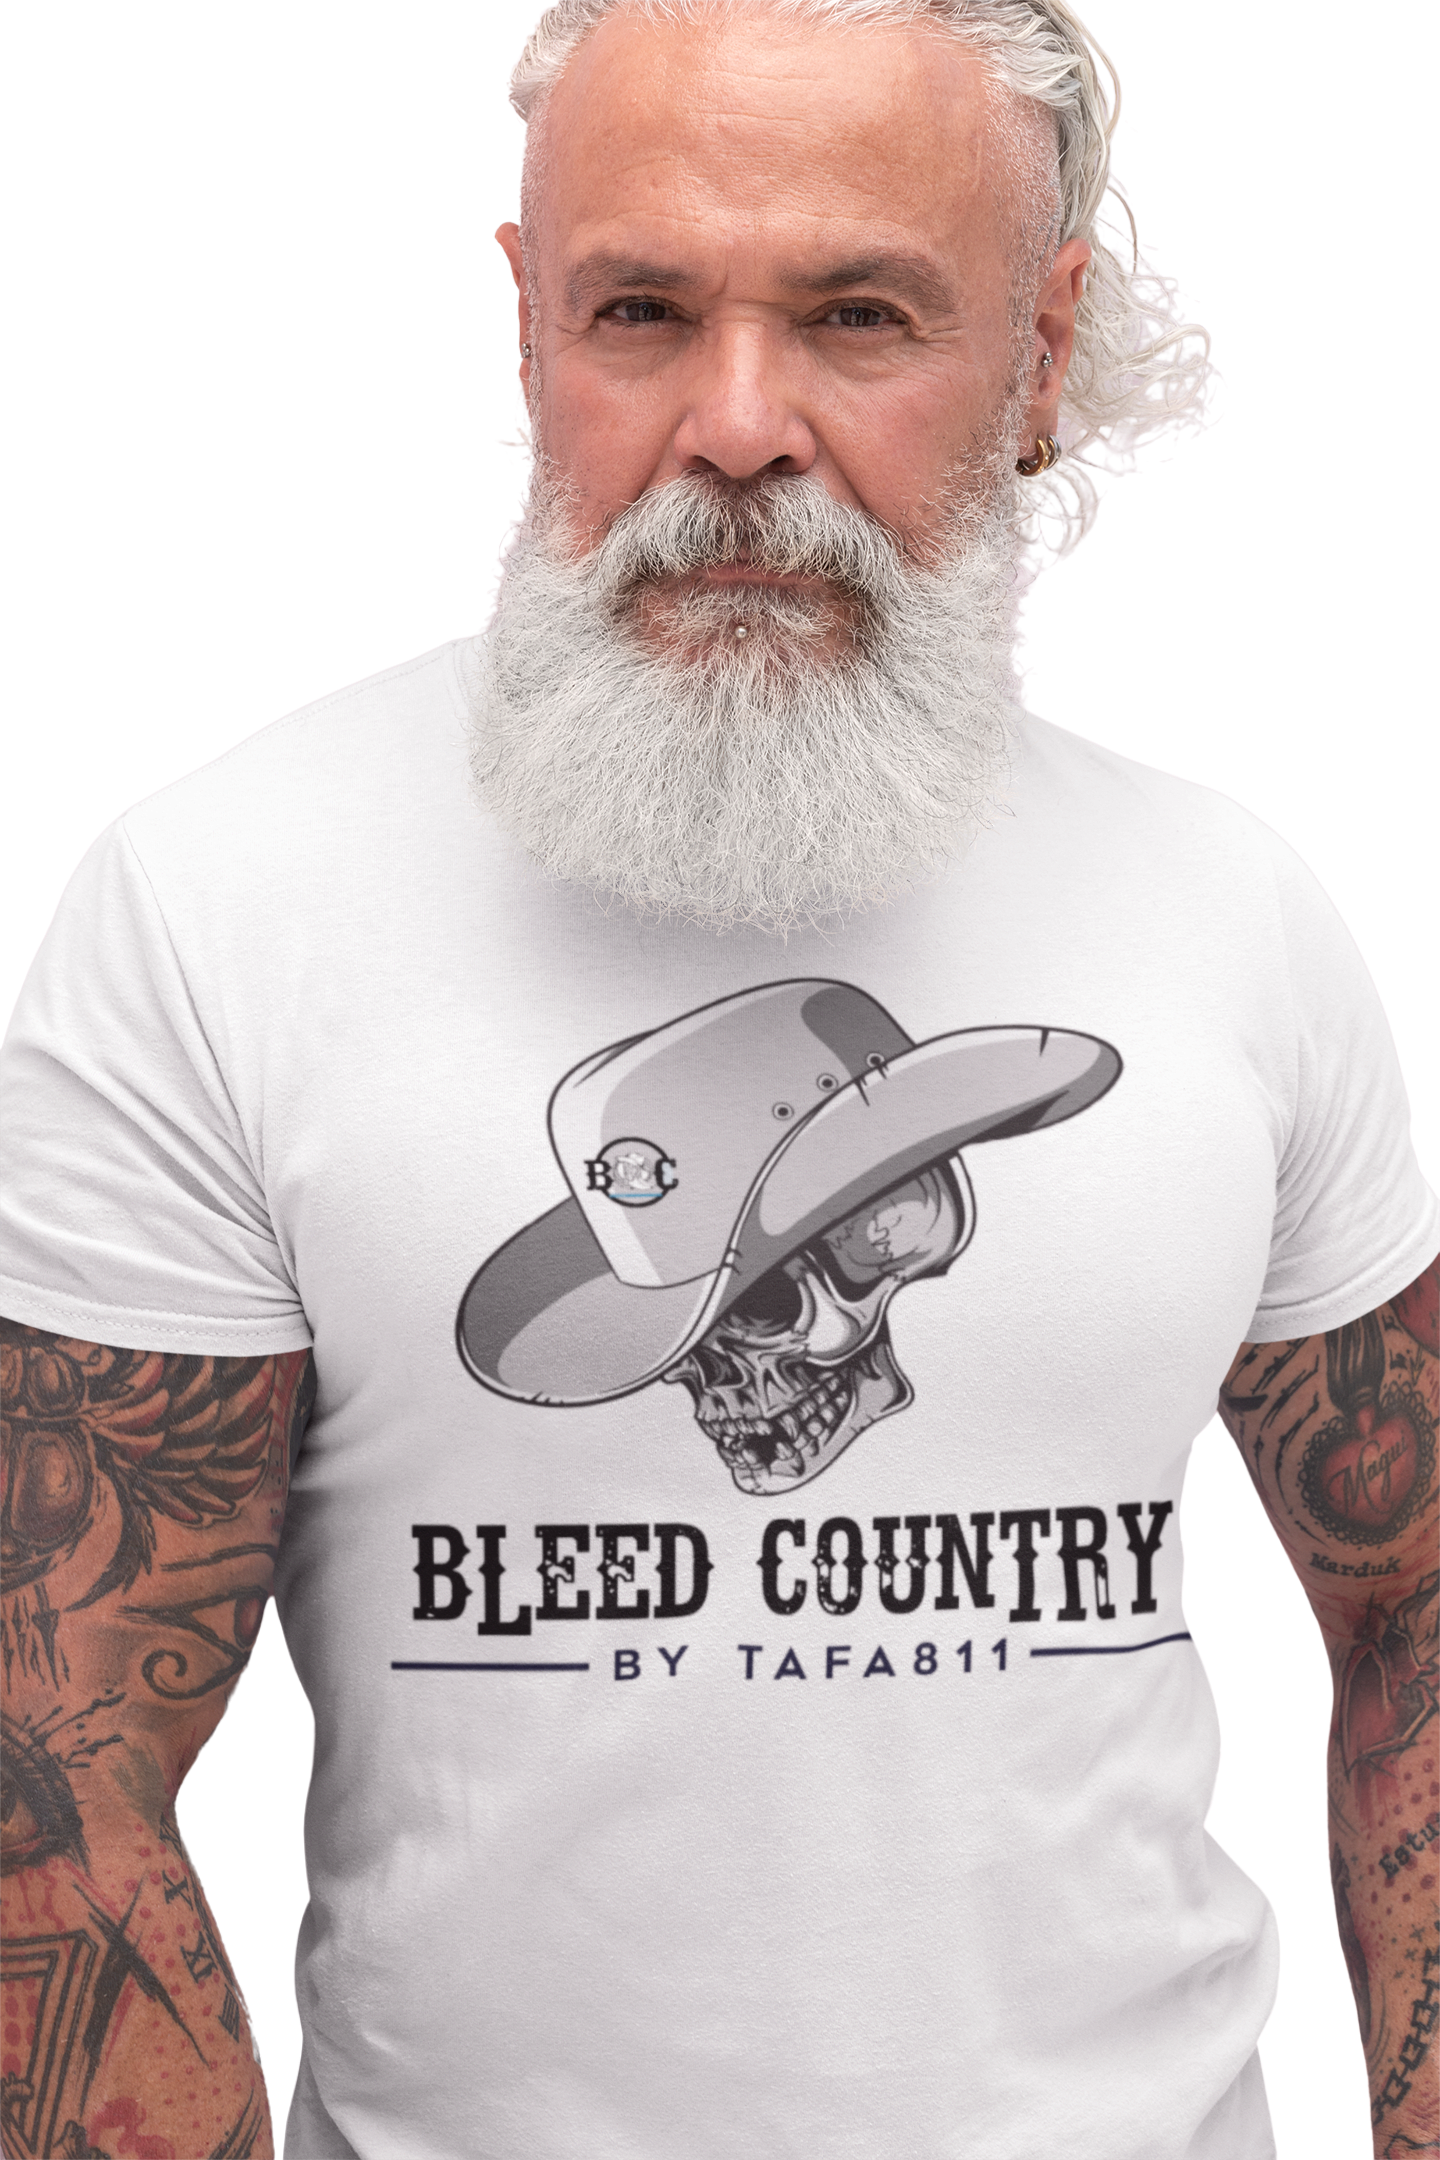 Bleed Country Clothing Collection